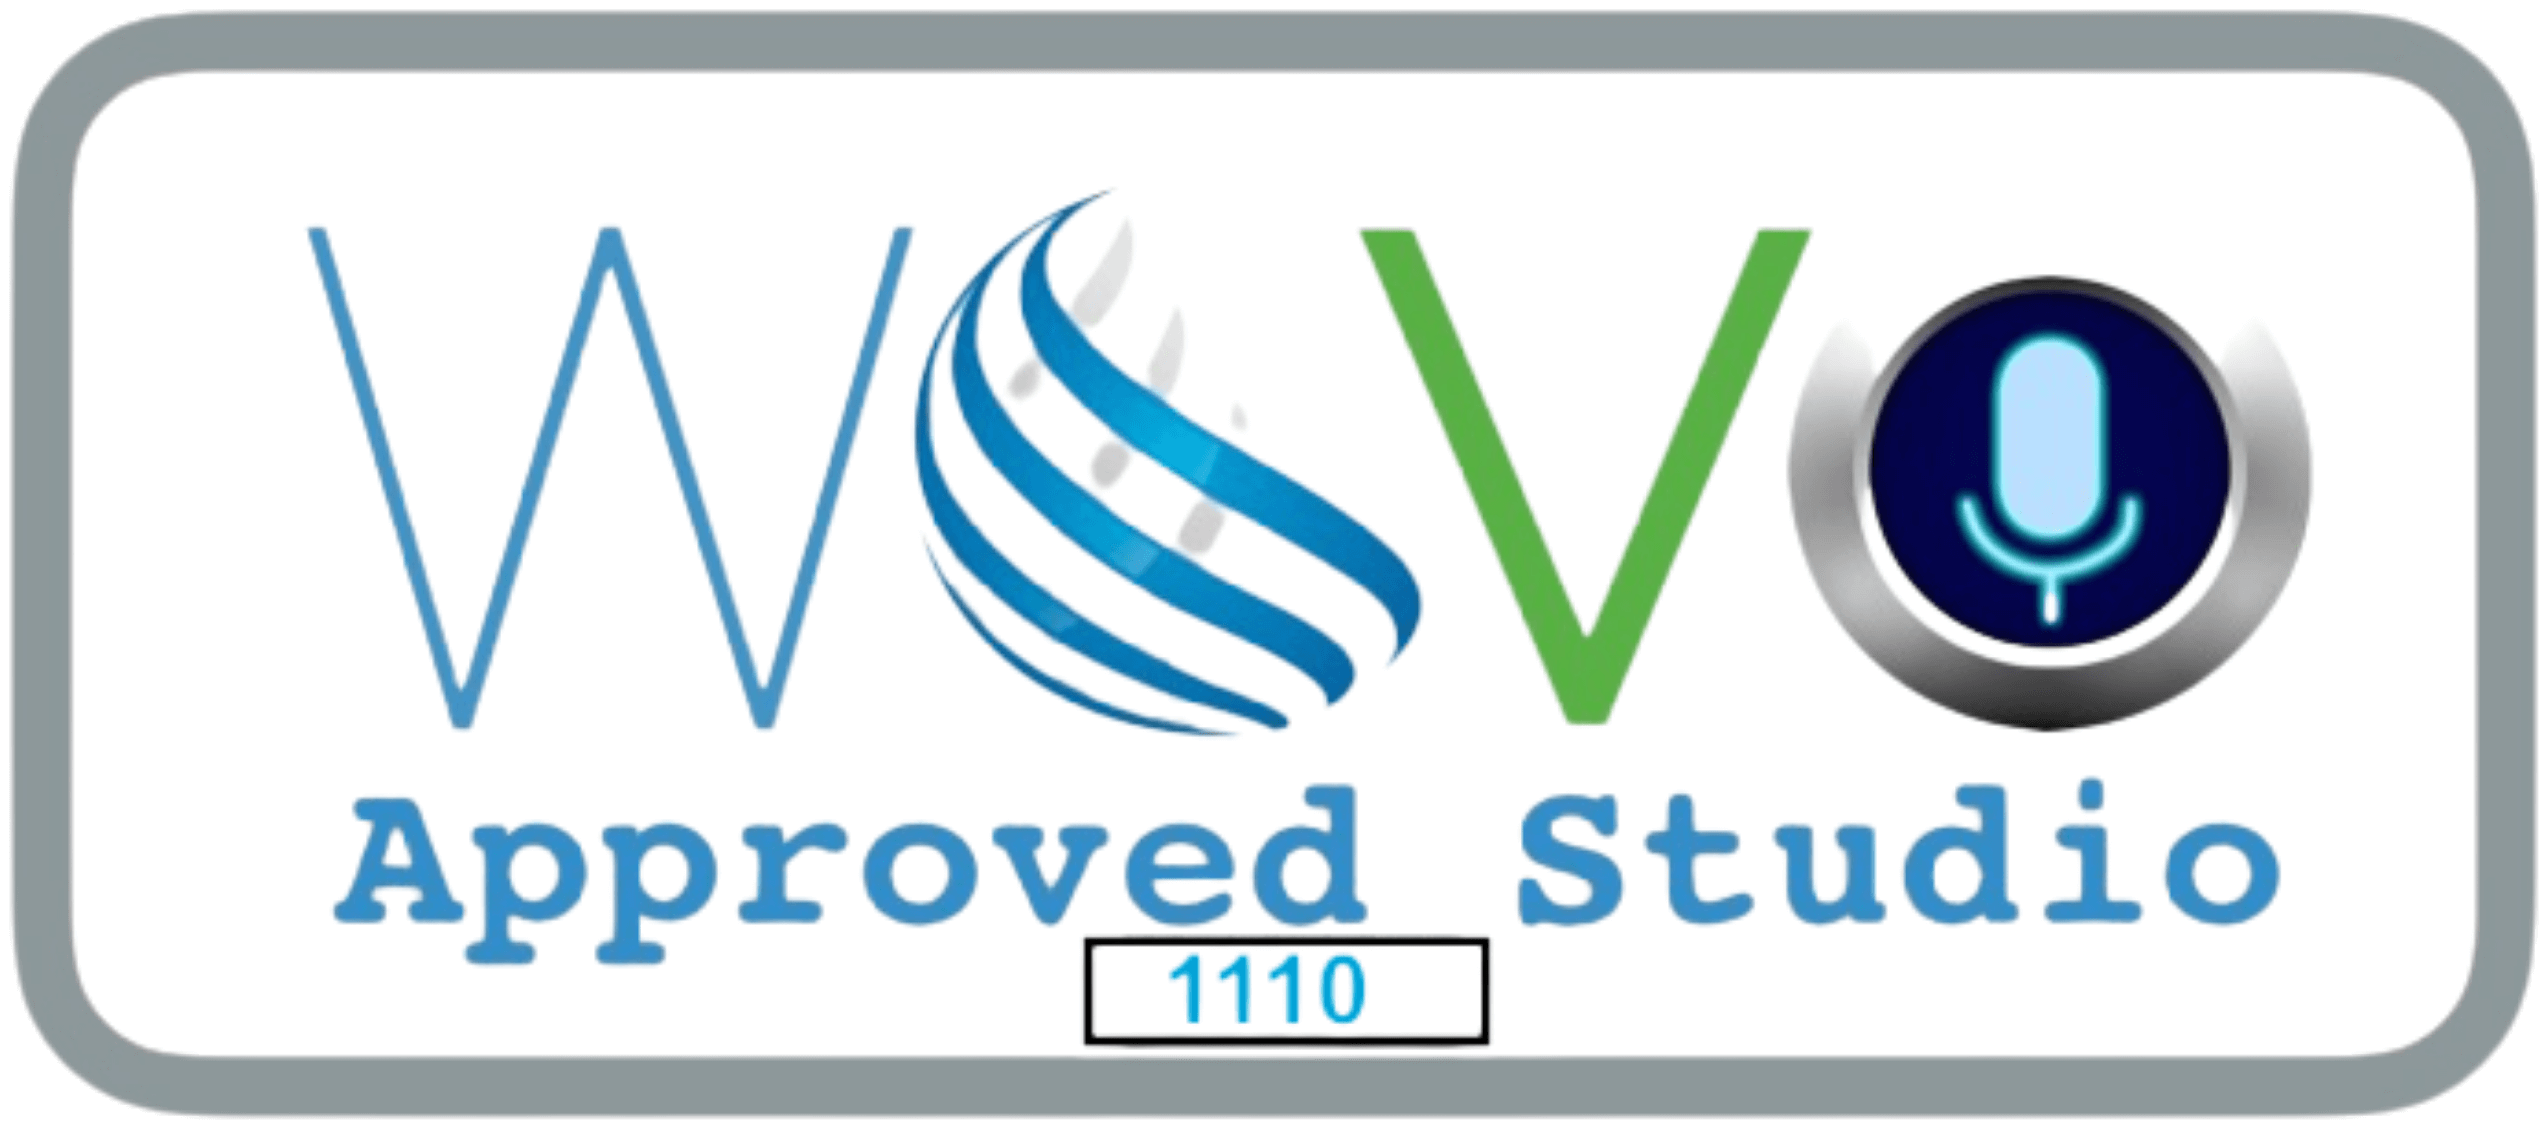 Contact - WOVO Approved Studio